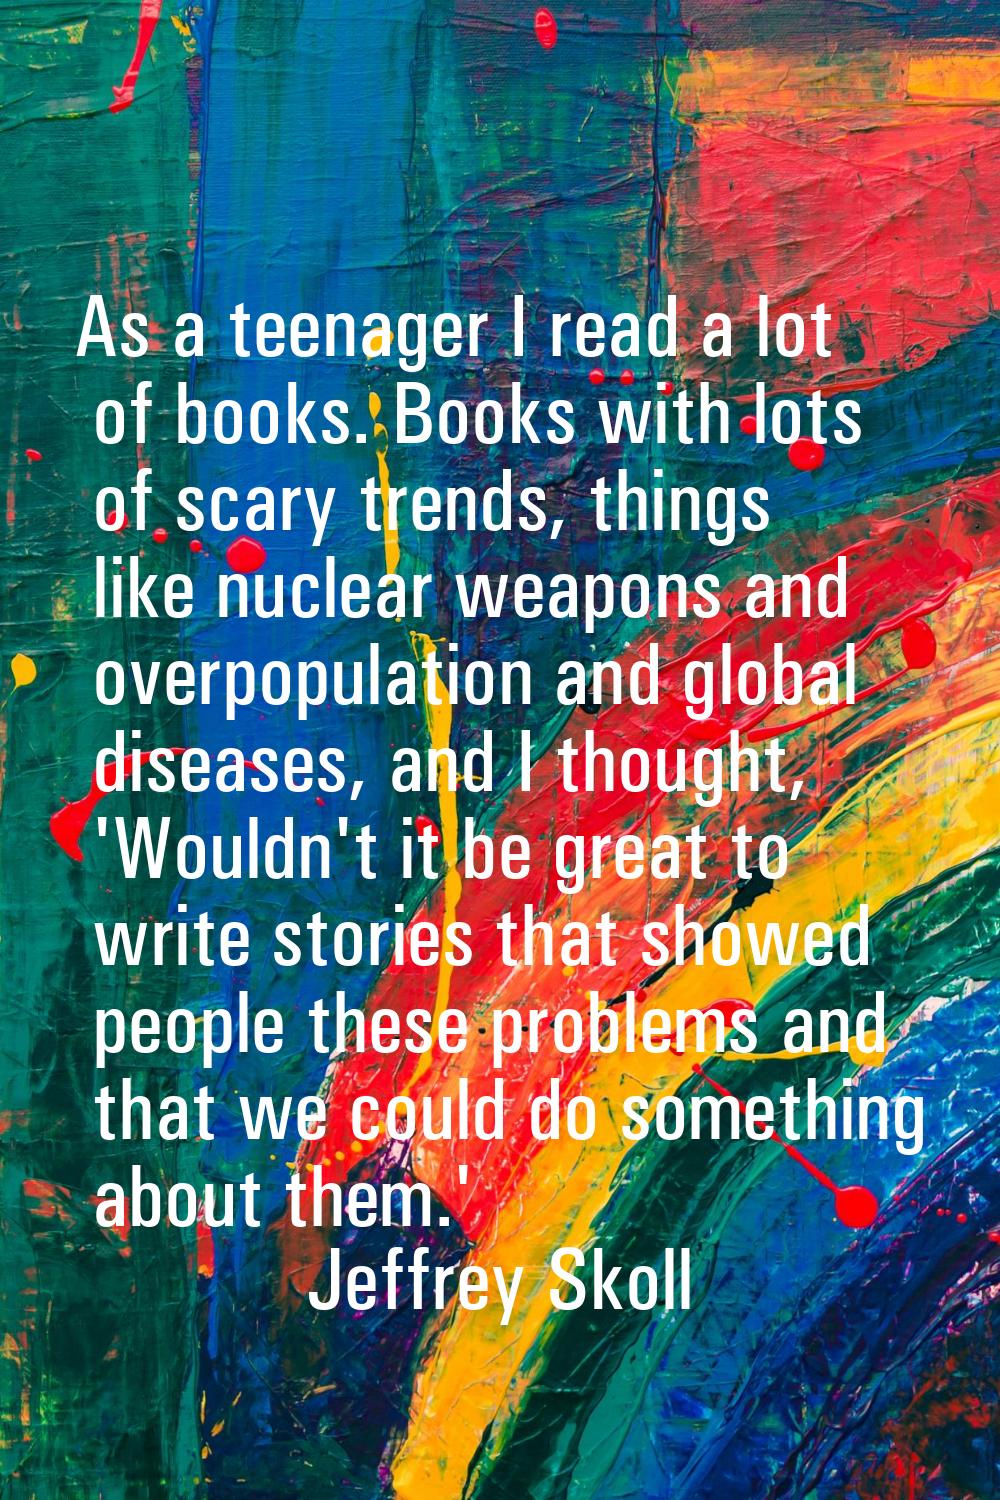 As a teenager I read a lot of books. Books with lots of scary trends, things like nuclear weapons a